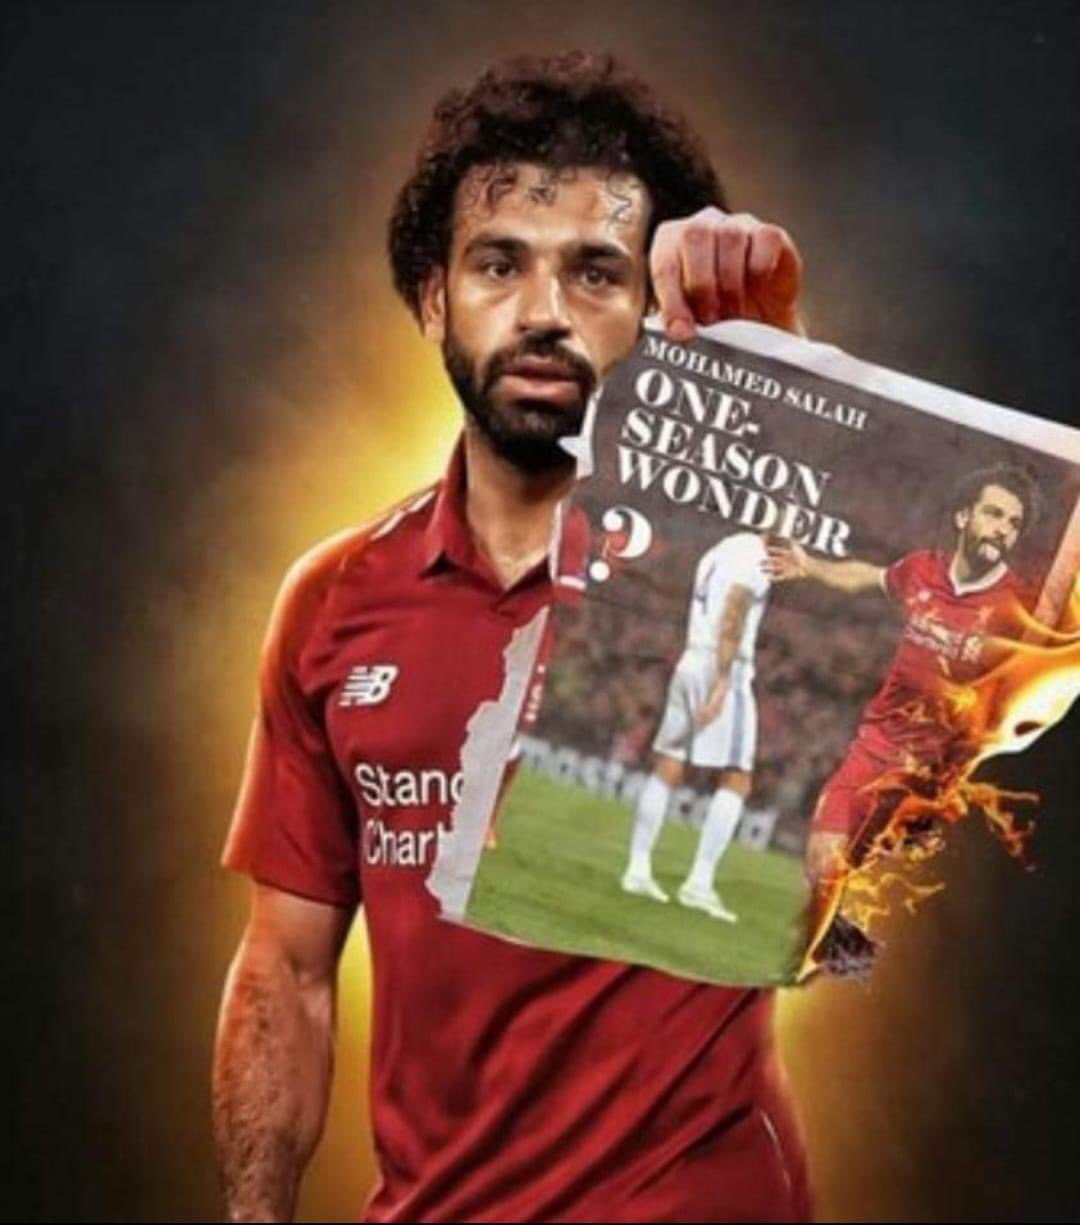 Mo Salah becomes the first ever player to score 20+ goals in 7 consecutive seasons as a Liverpool player. As the Egyptian King was at the centre of Liverpool's four goals in seven minutes.